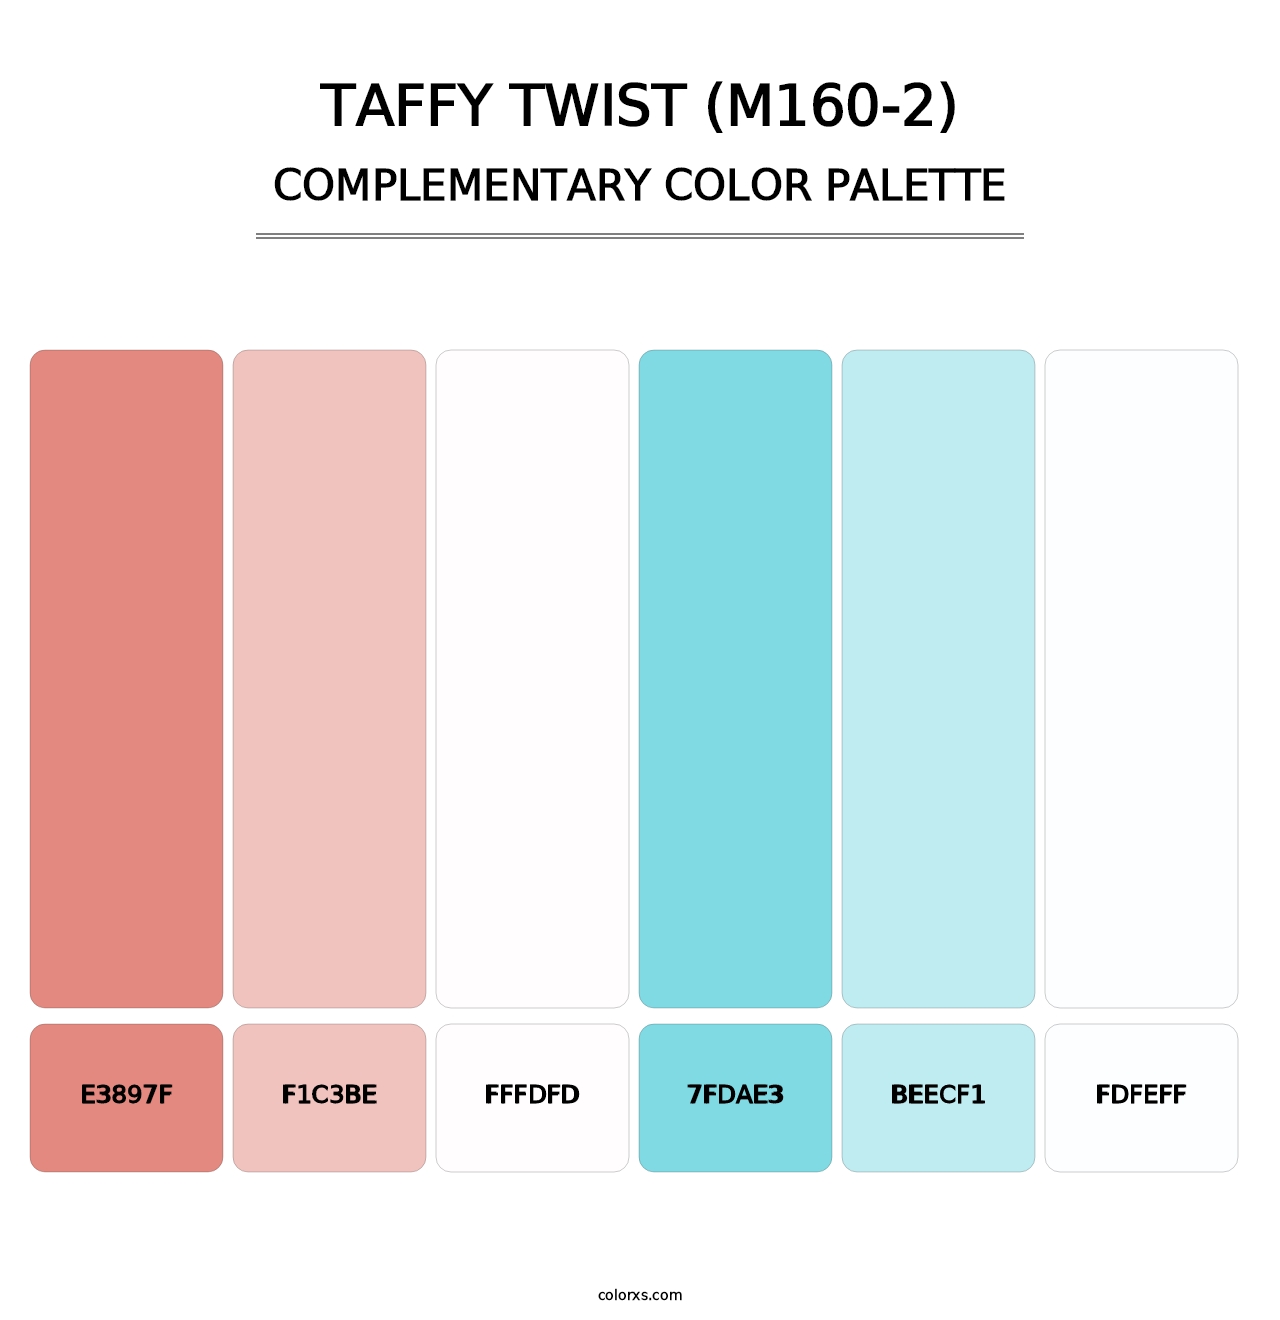 Taffy Twist (M160-2) - Complementary Color Palette